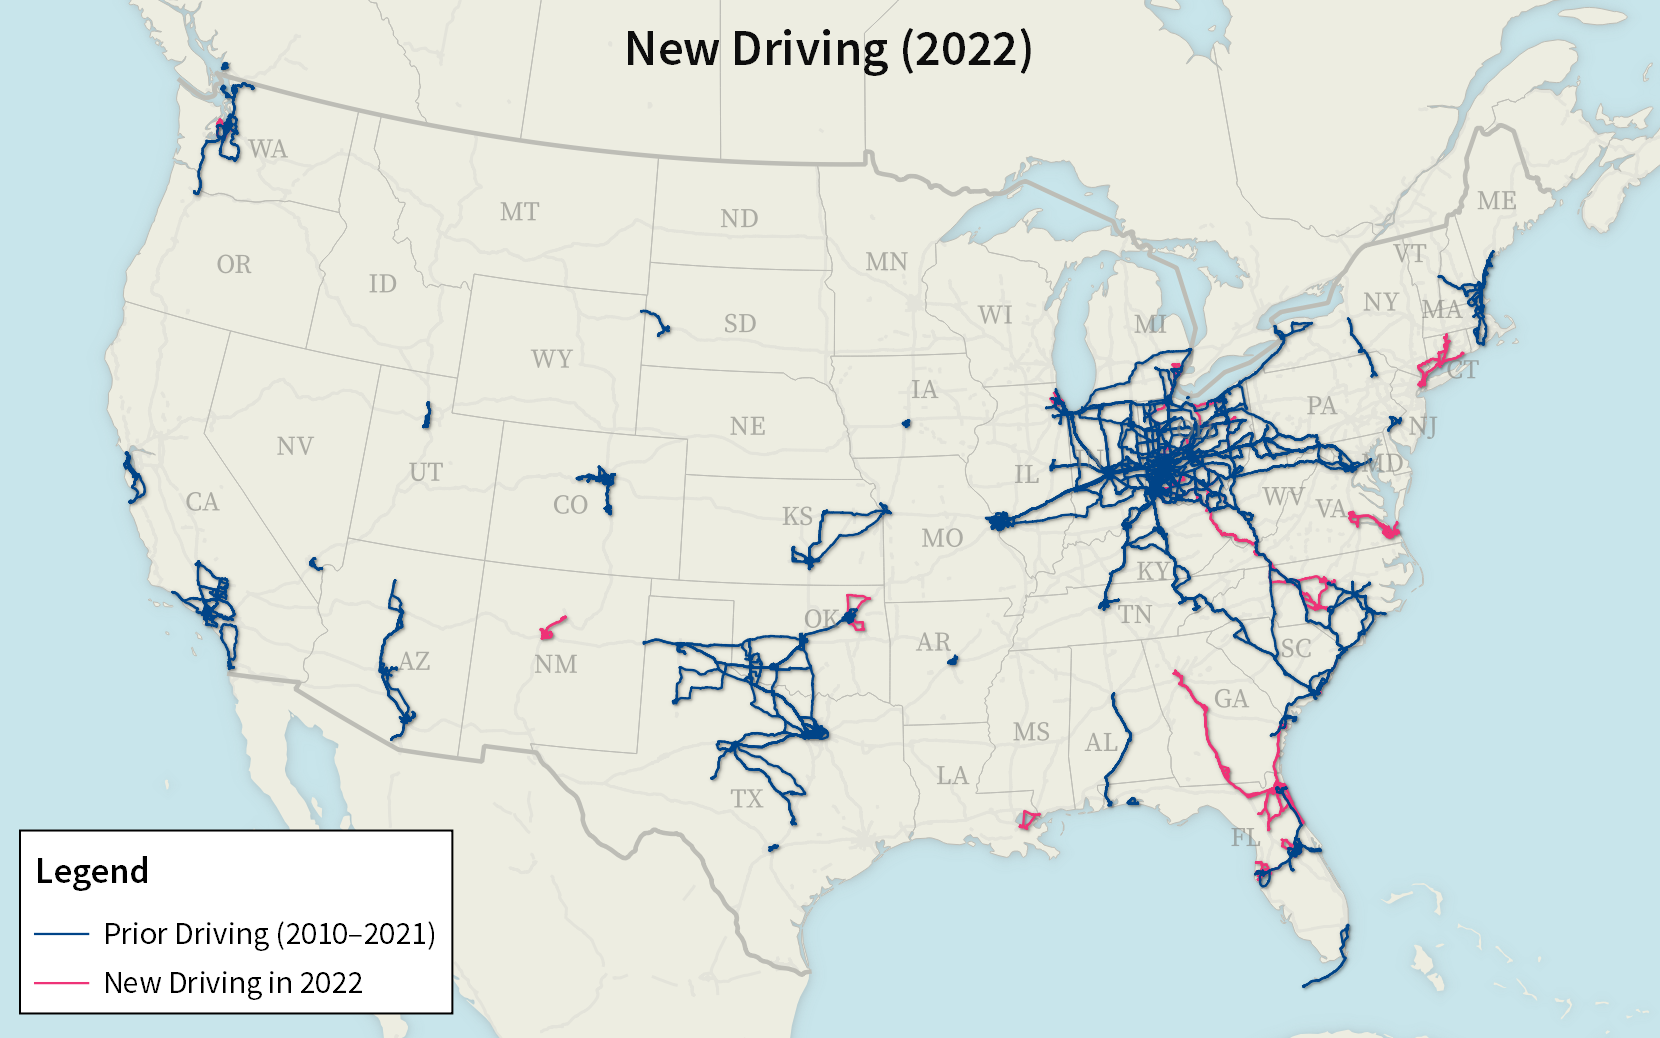 A map of the United States with driving tracks, with tracks that were new in 2022 highlighted.